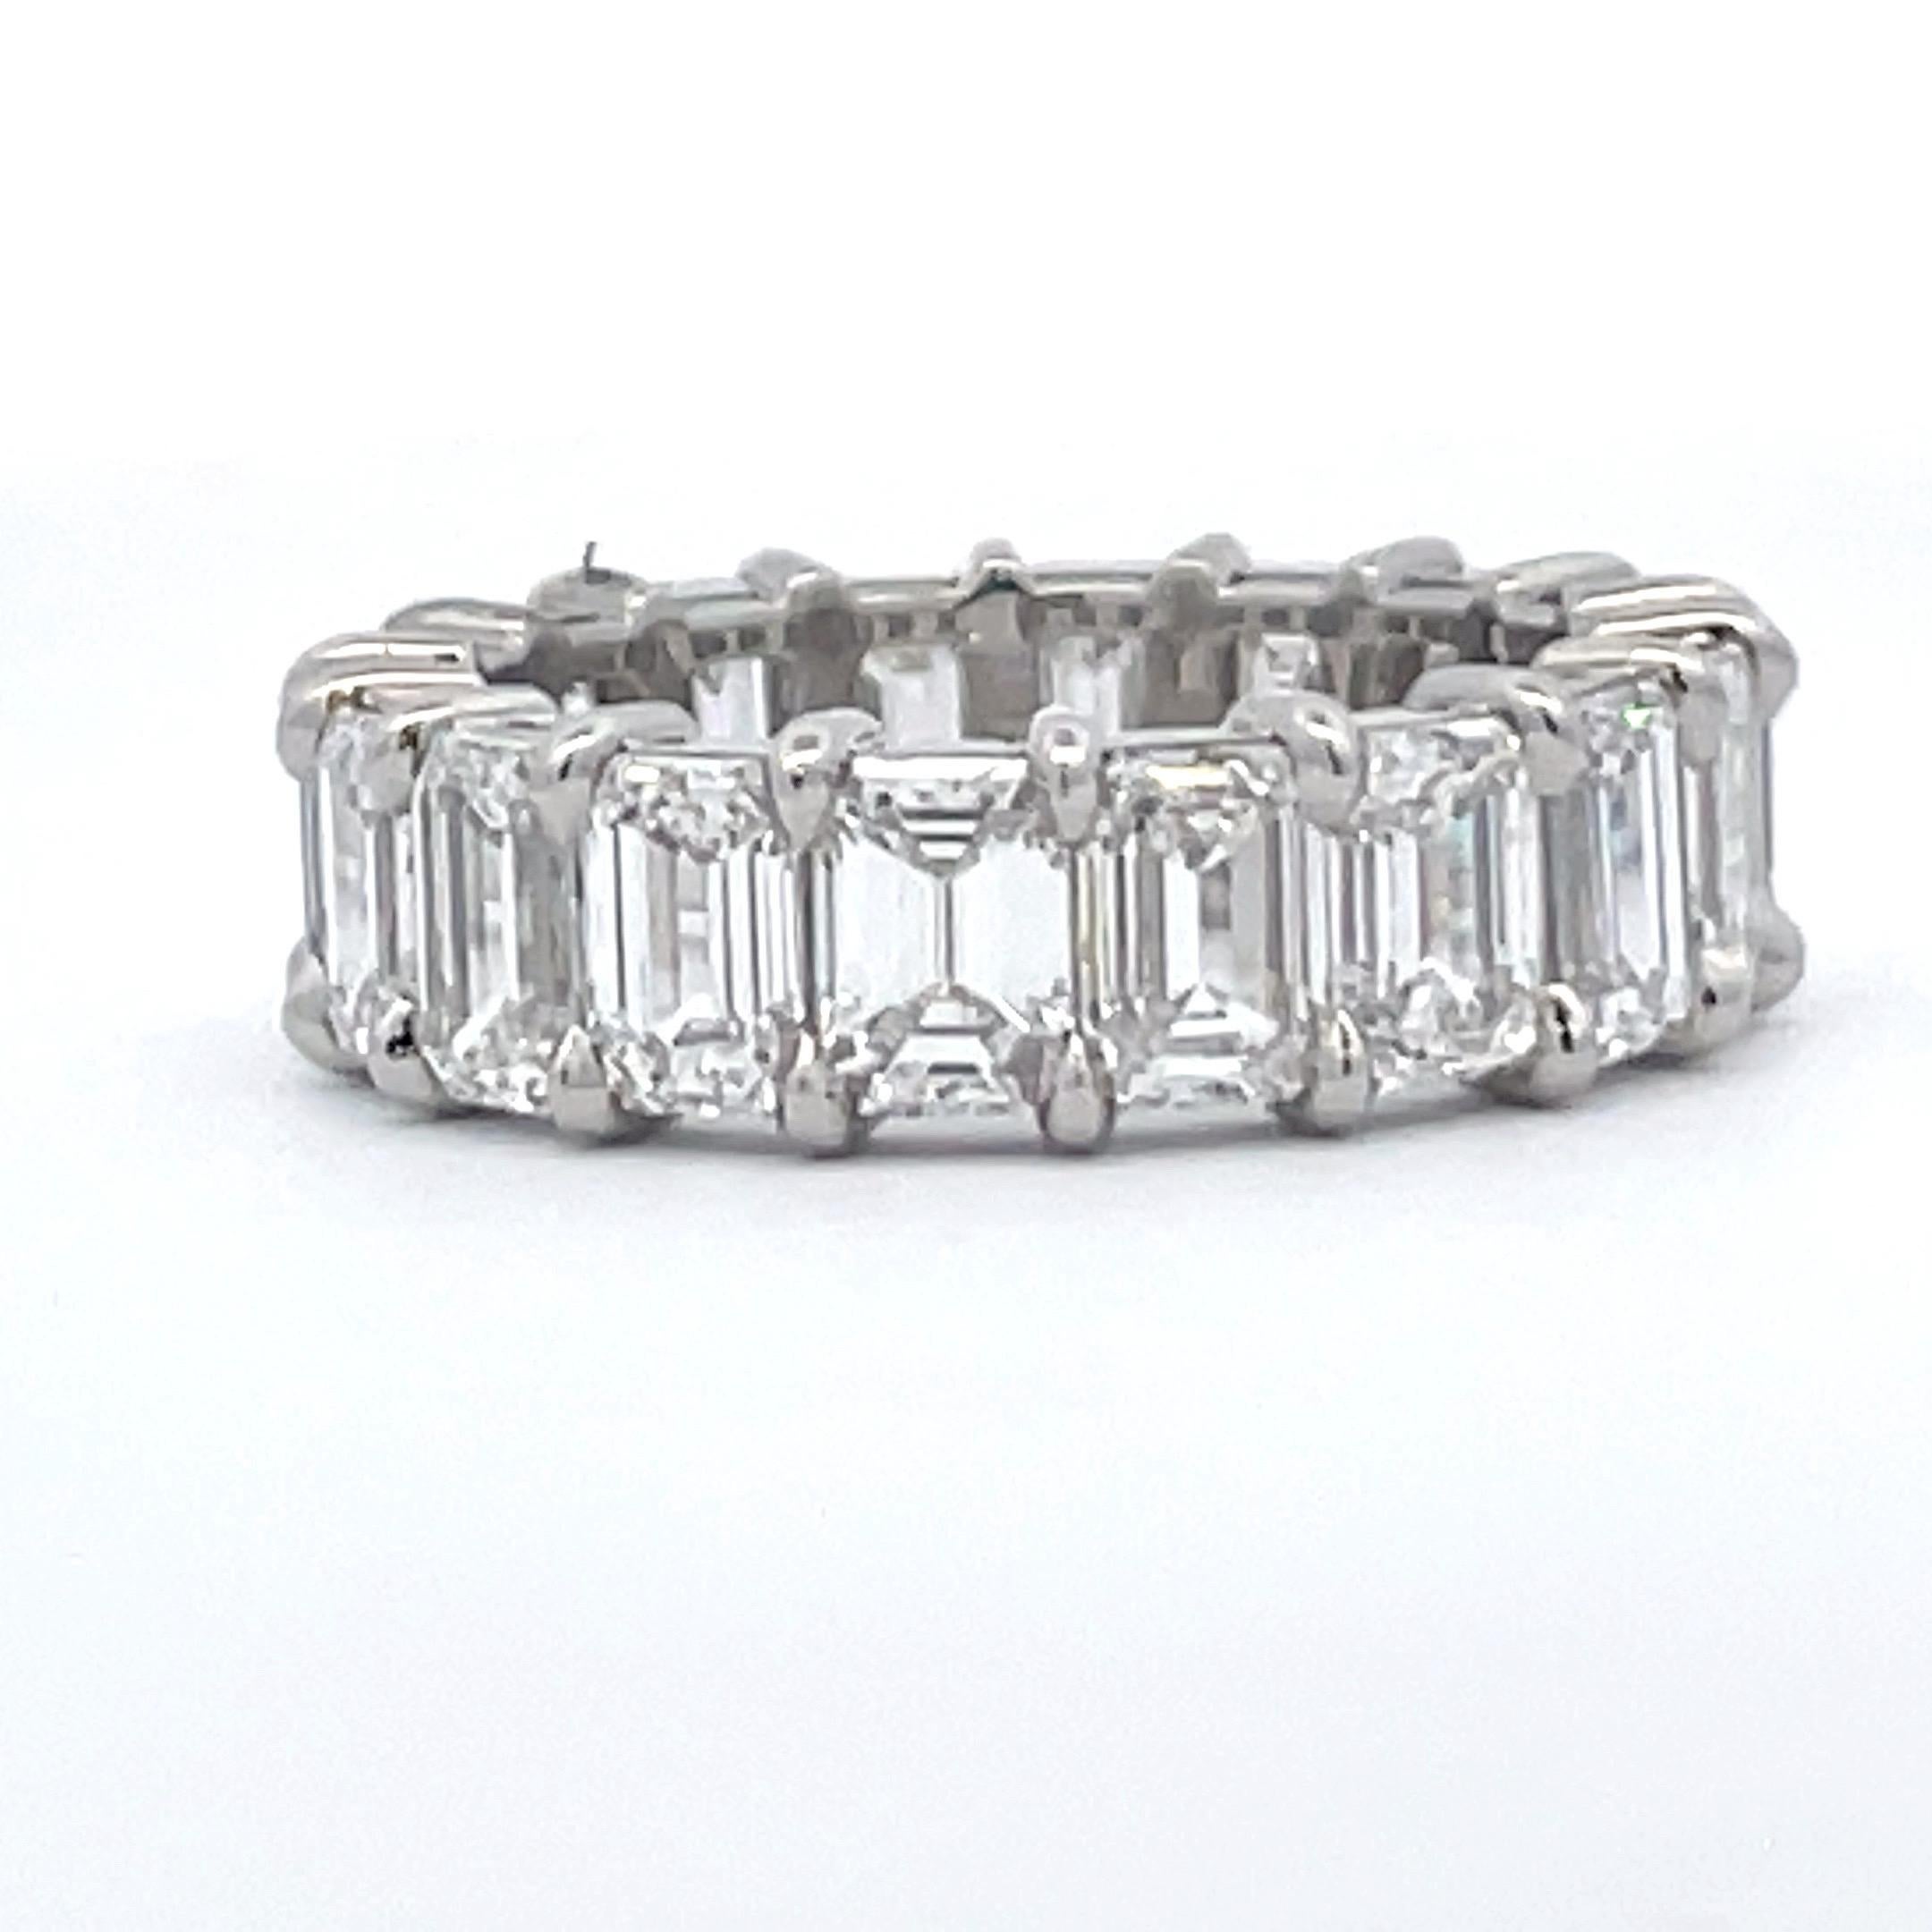 Gorgeous Eternity Ring featuring 20 Emerald Cut Diamonds weighing 6.19 Carats, crafted in Platinum. 
Color F-G Clarity VVS2-VS2
Average 0.31 points. Perfectly Matched!
Airline gallery, comfort fit!
Also available in 0.50/0.70 points, Oval Cuts & GIA